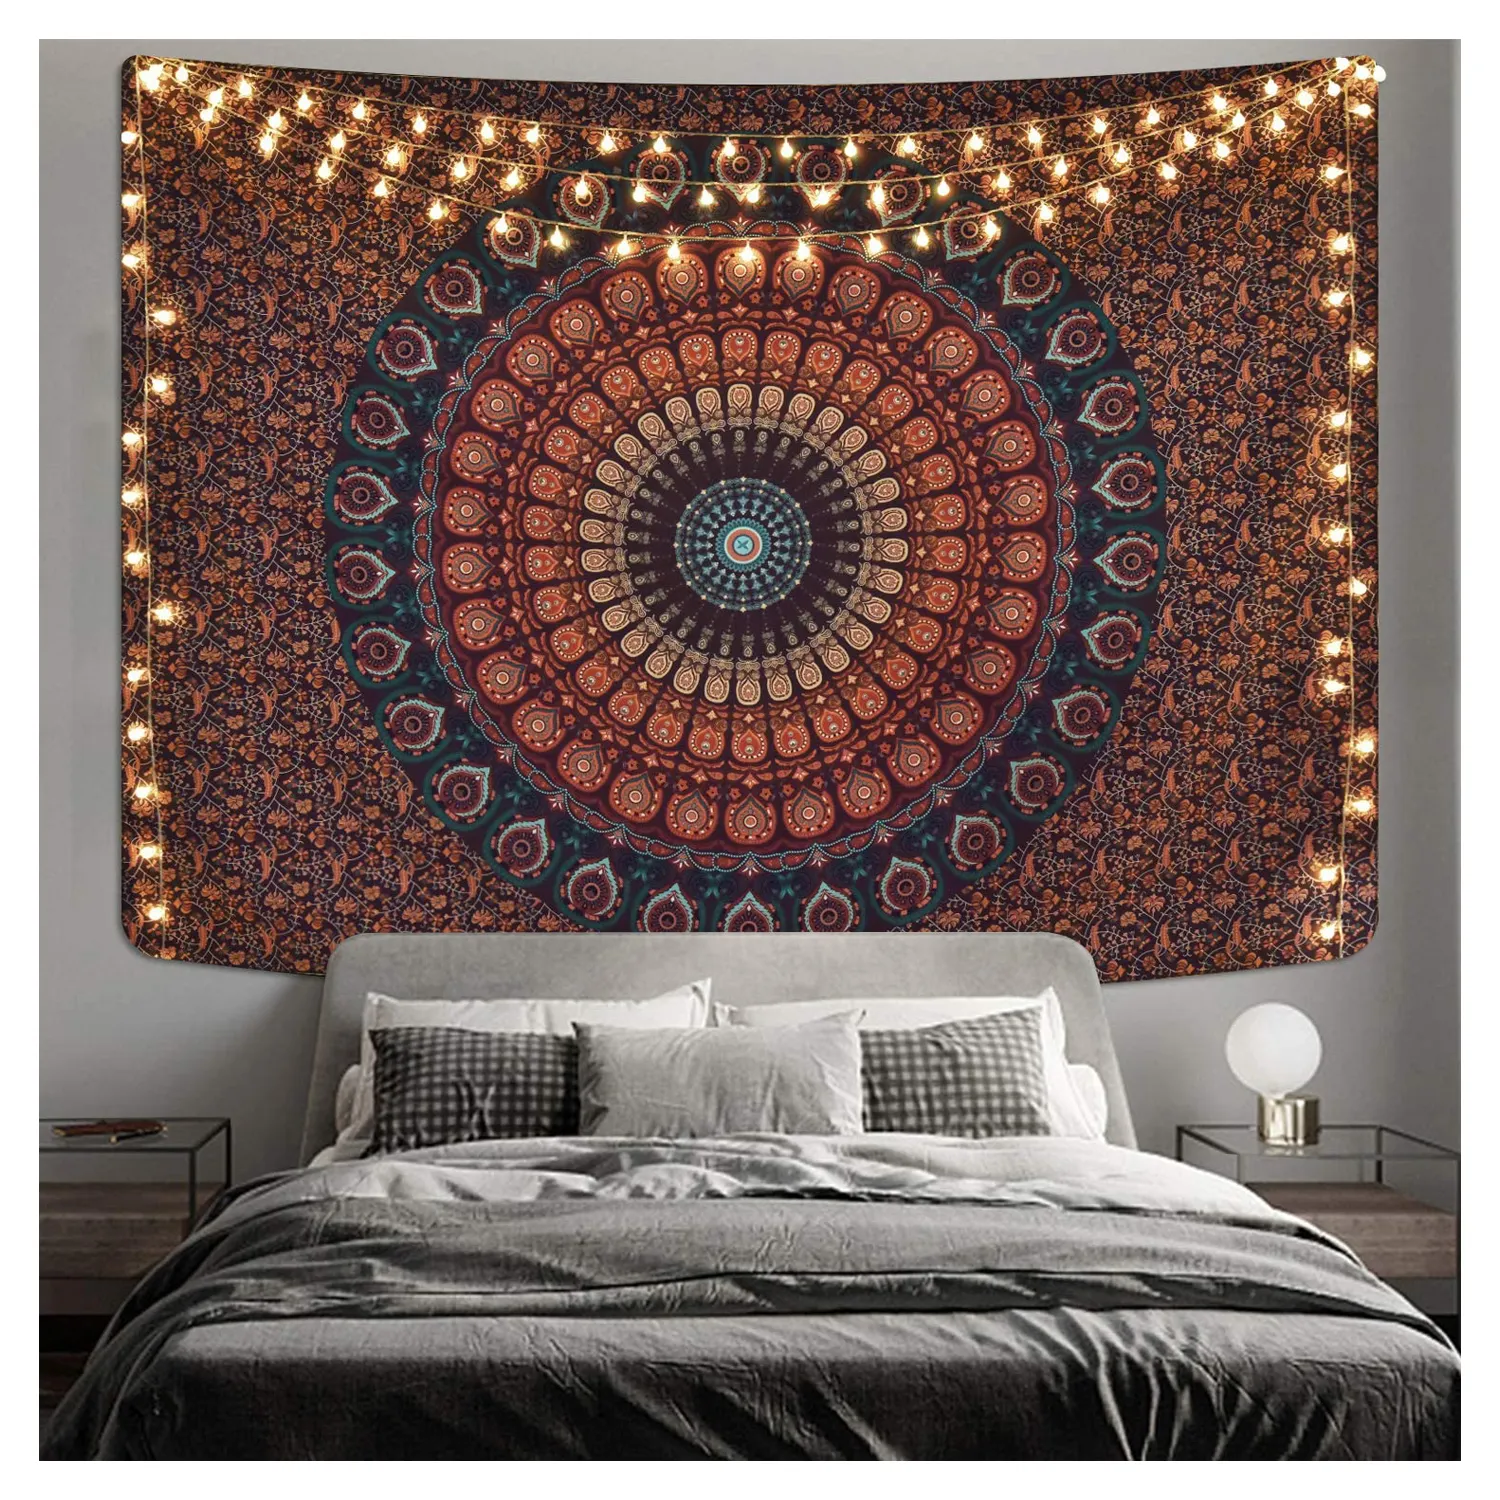 Hippie Bohemian Psychedelic Golden Blue Peacock Mandala Wall Hanging Bedding Tapestry